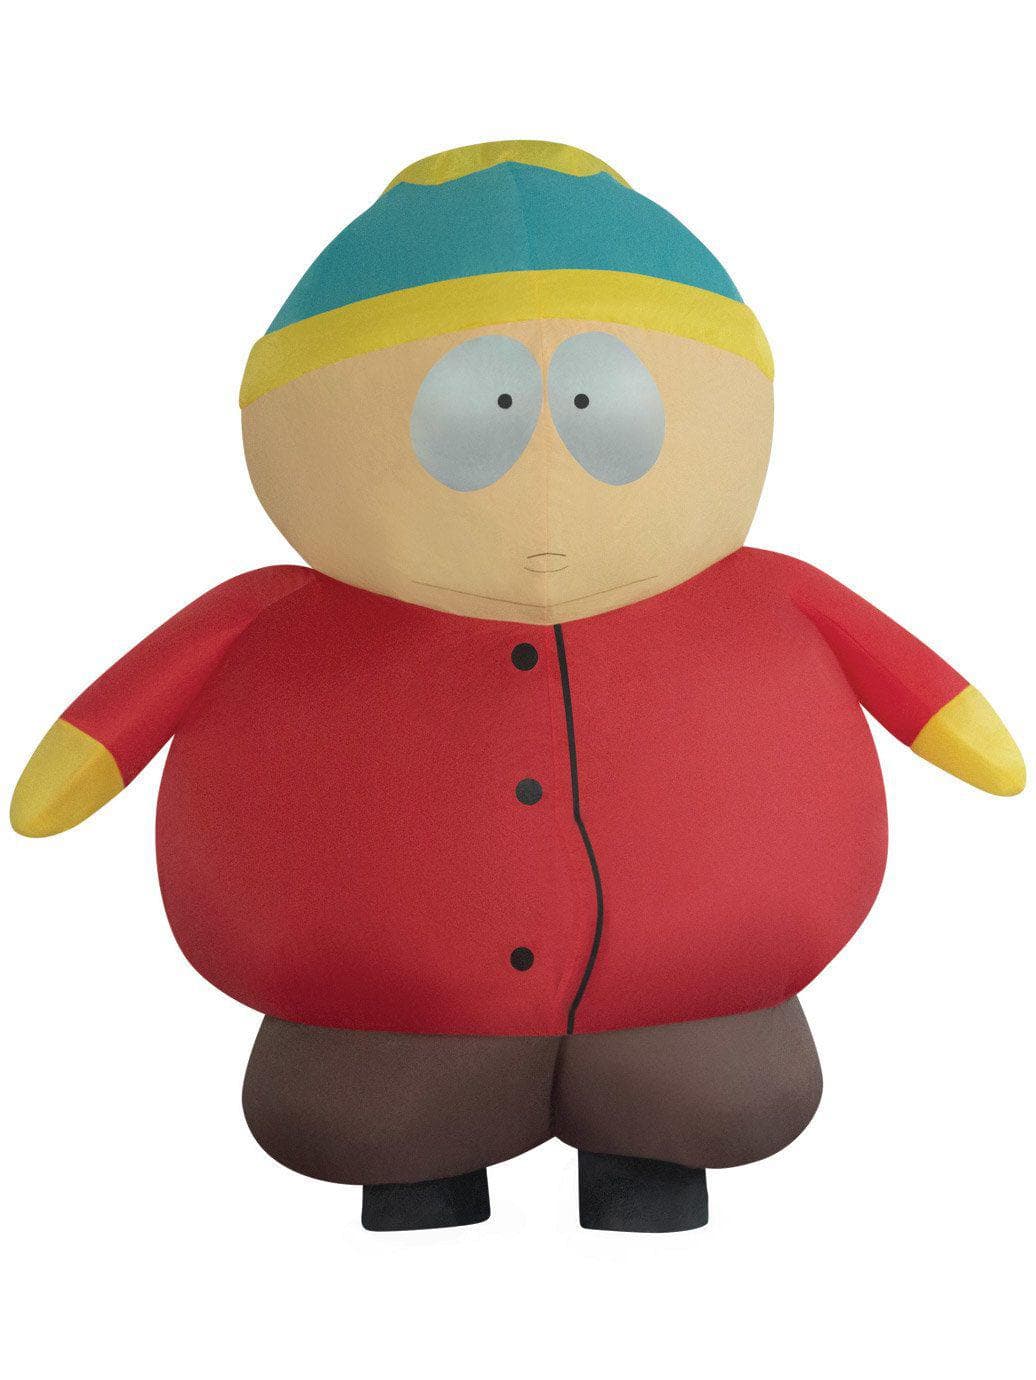 Adult South Park Cartman Inflatable Costume - costumes.com